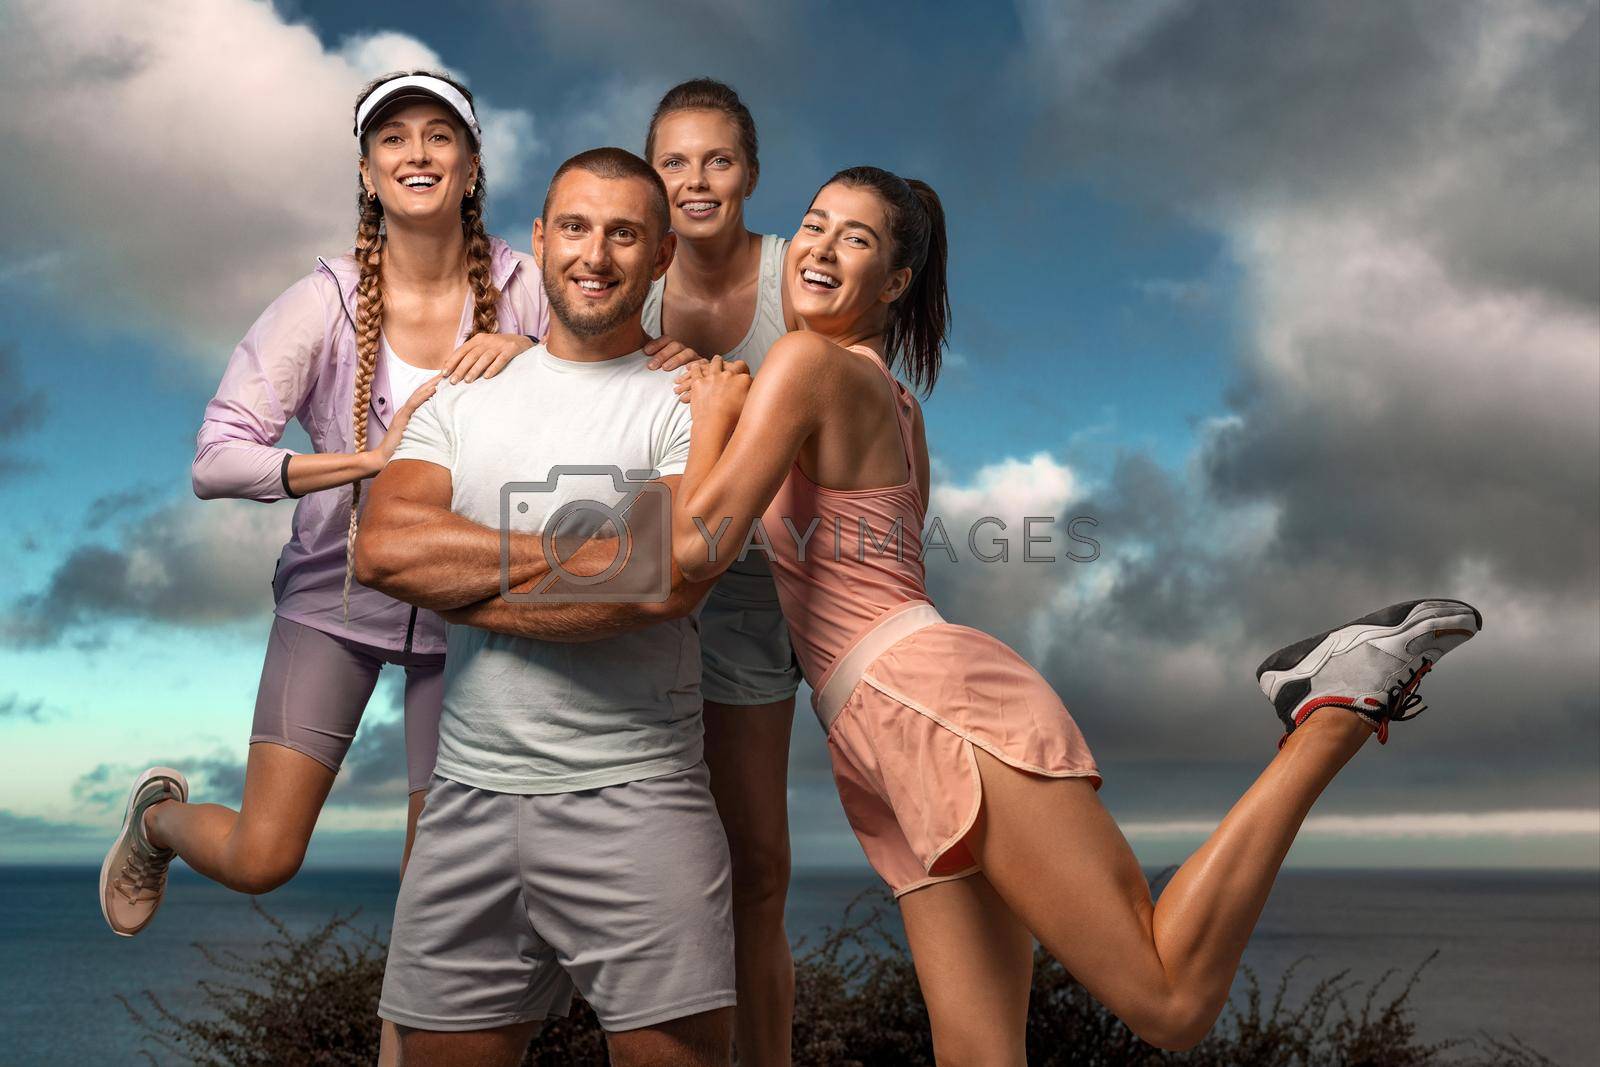 Royalty free image of Certified group exercise instructor and his team. Premium high resolution photo Smiling women and man fitness team. A happy group of runners rest after running. by MikeOrlov